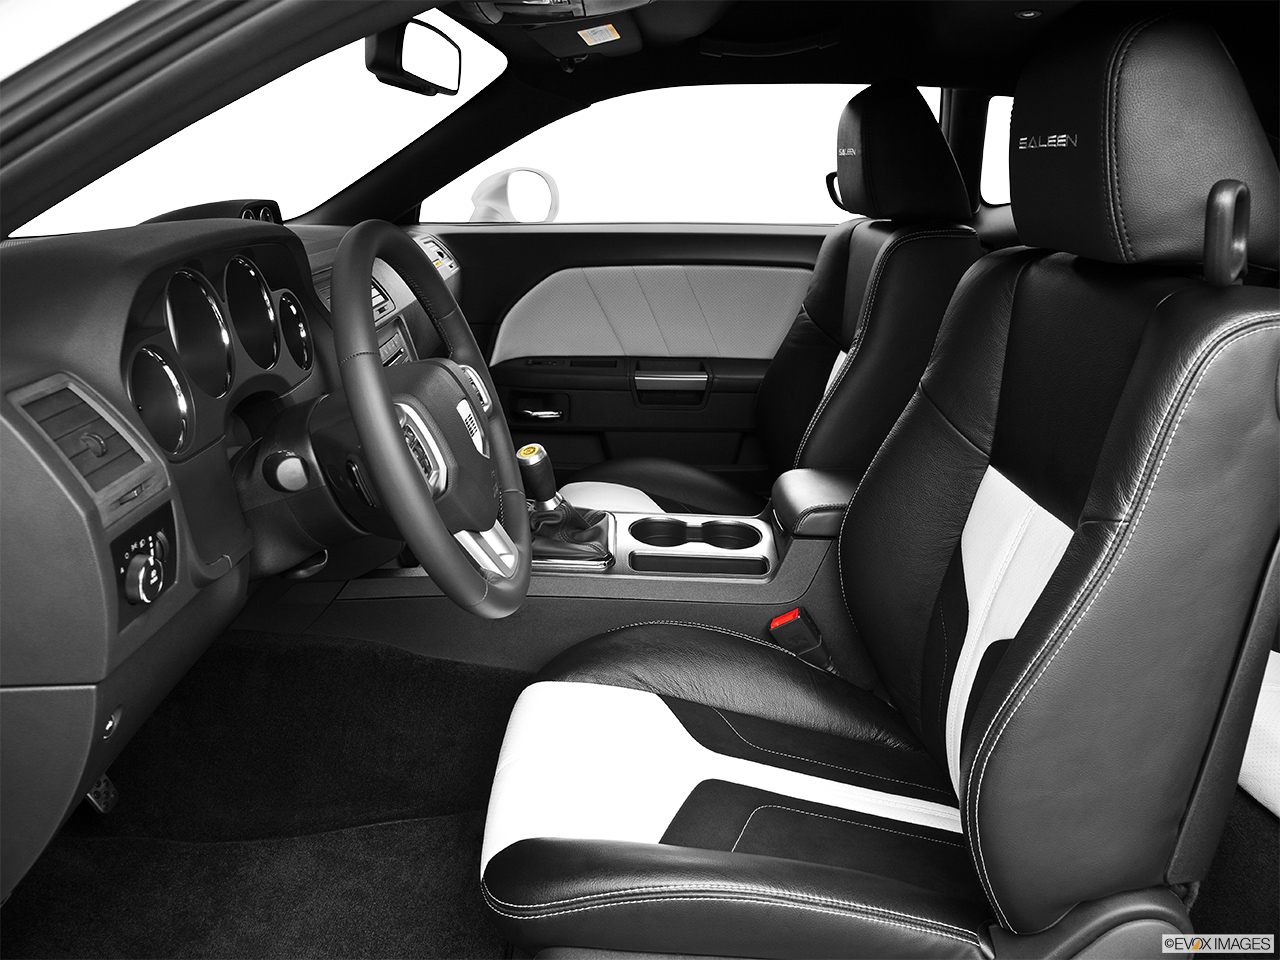 2014 Saleen 570 Challenger Label 570 Black Label Front seats from Drivers Side. 